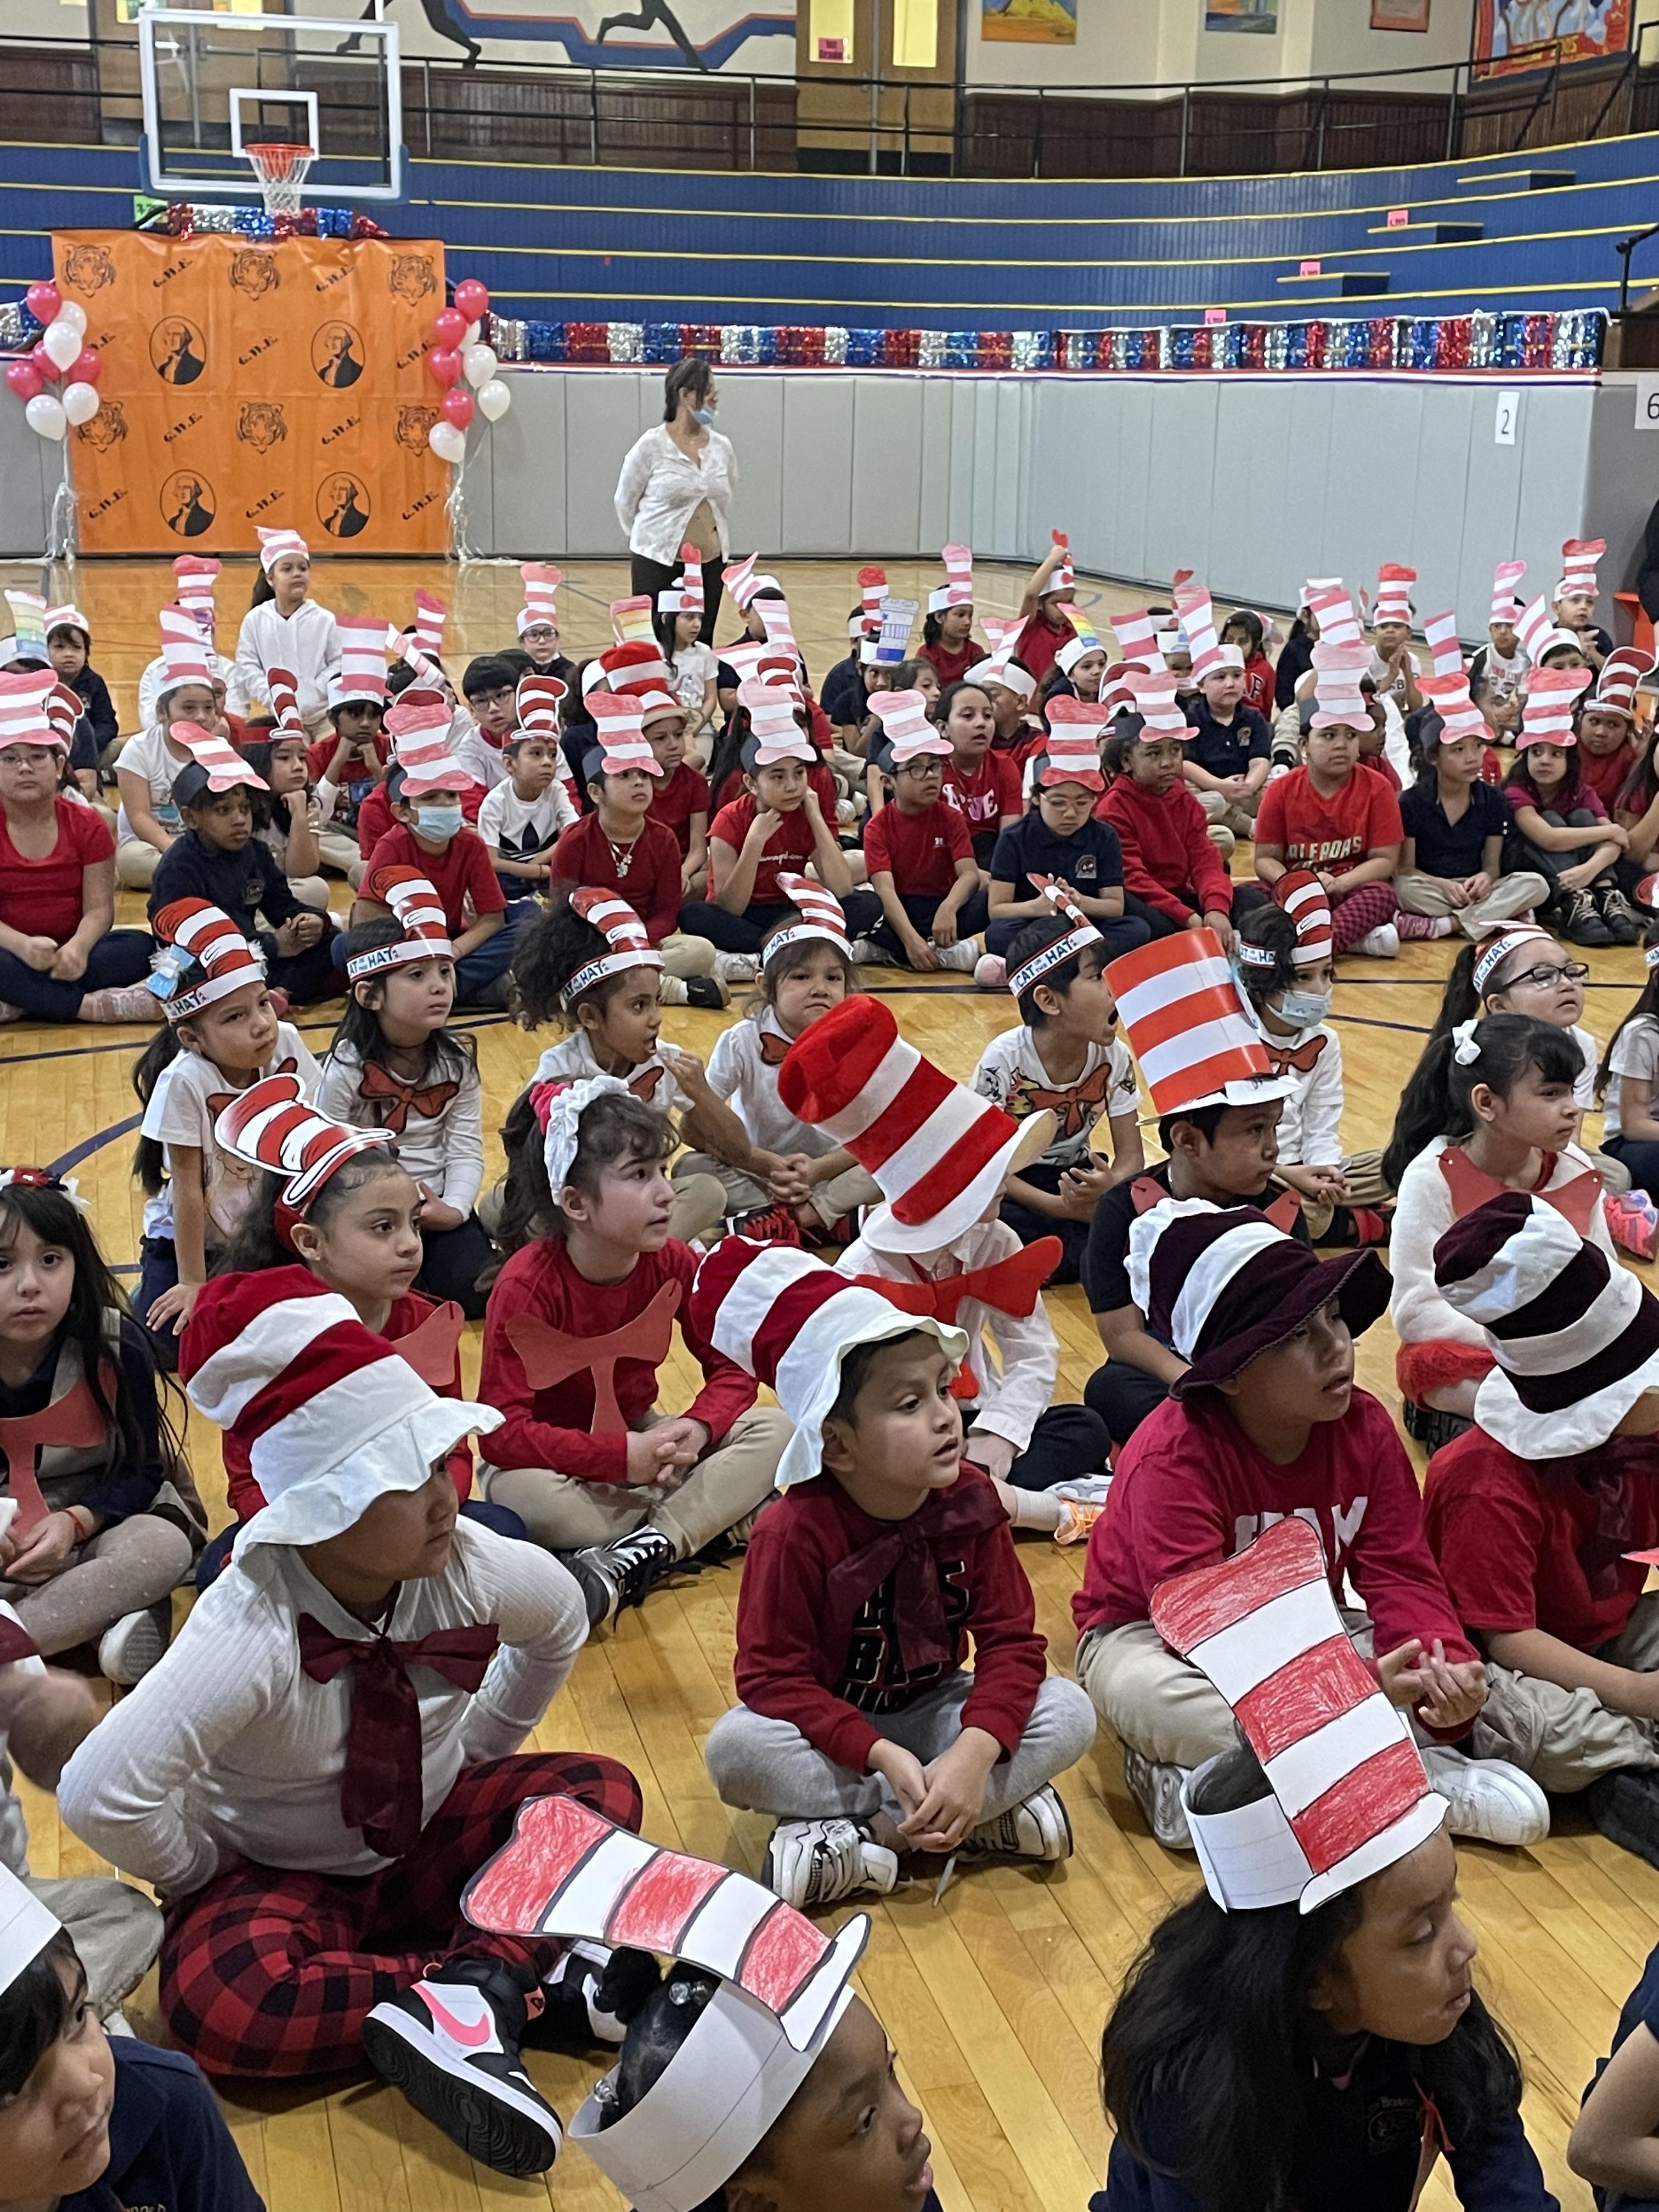 The Importance of Read Across America at the Washington School